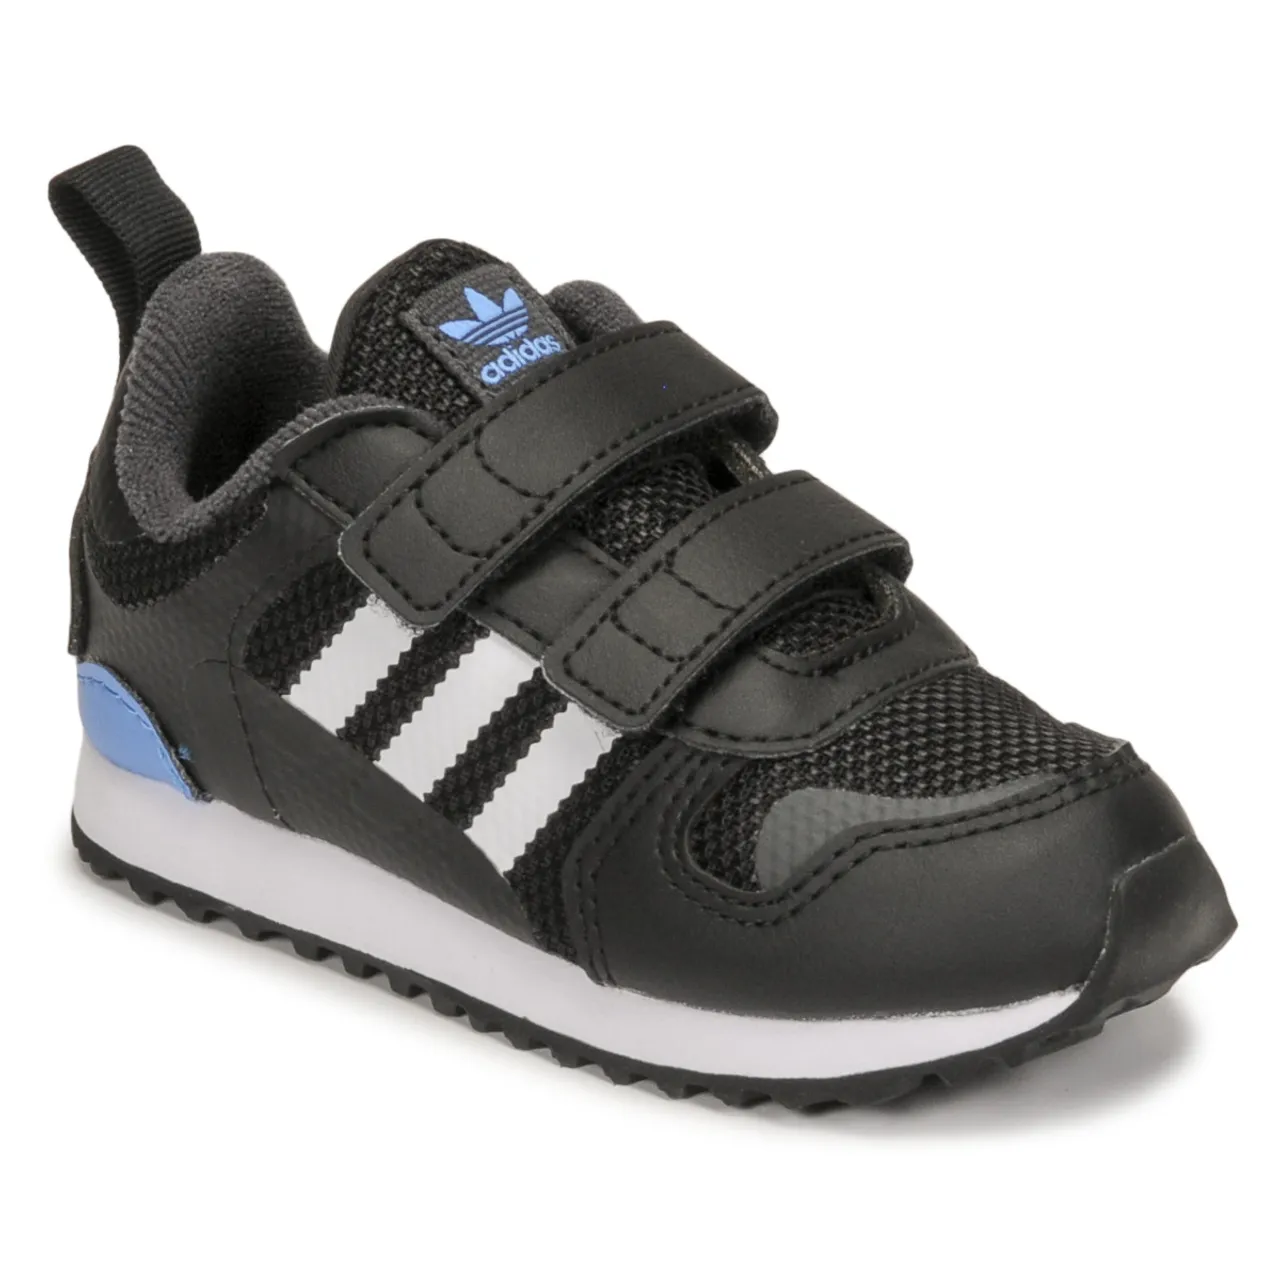 adidas  ZX 700 HD CF I  boys's Children's Shoes (Trainers) in Black